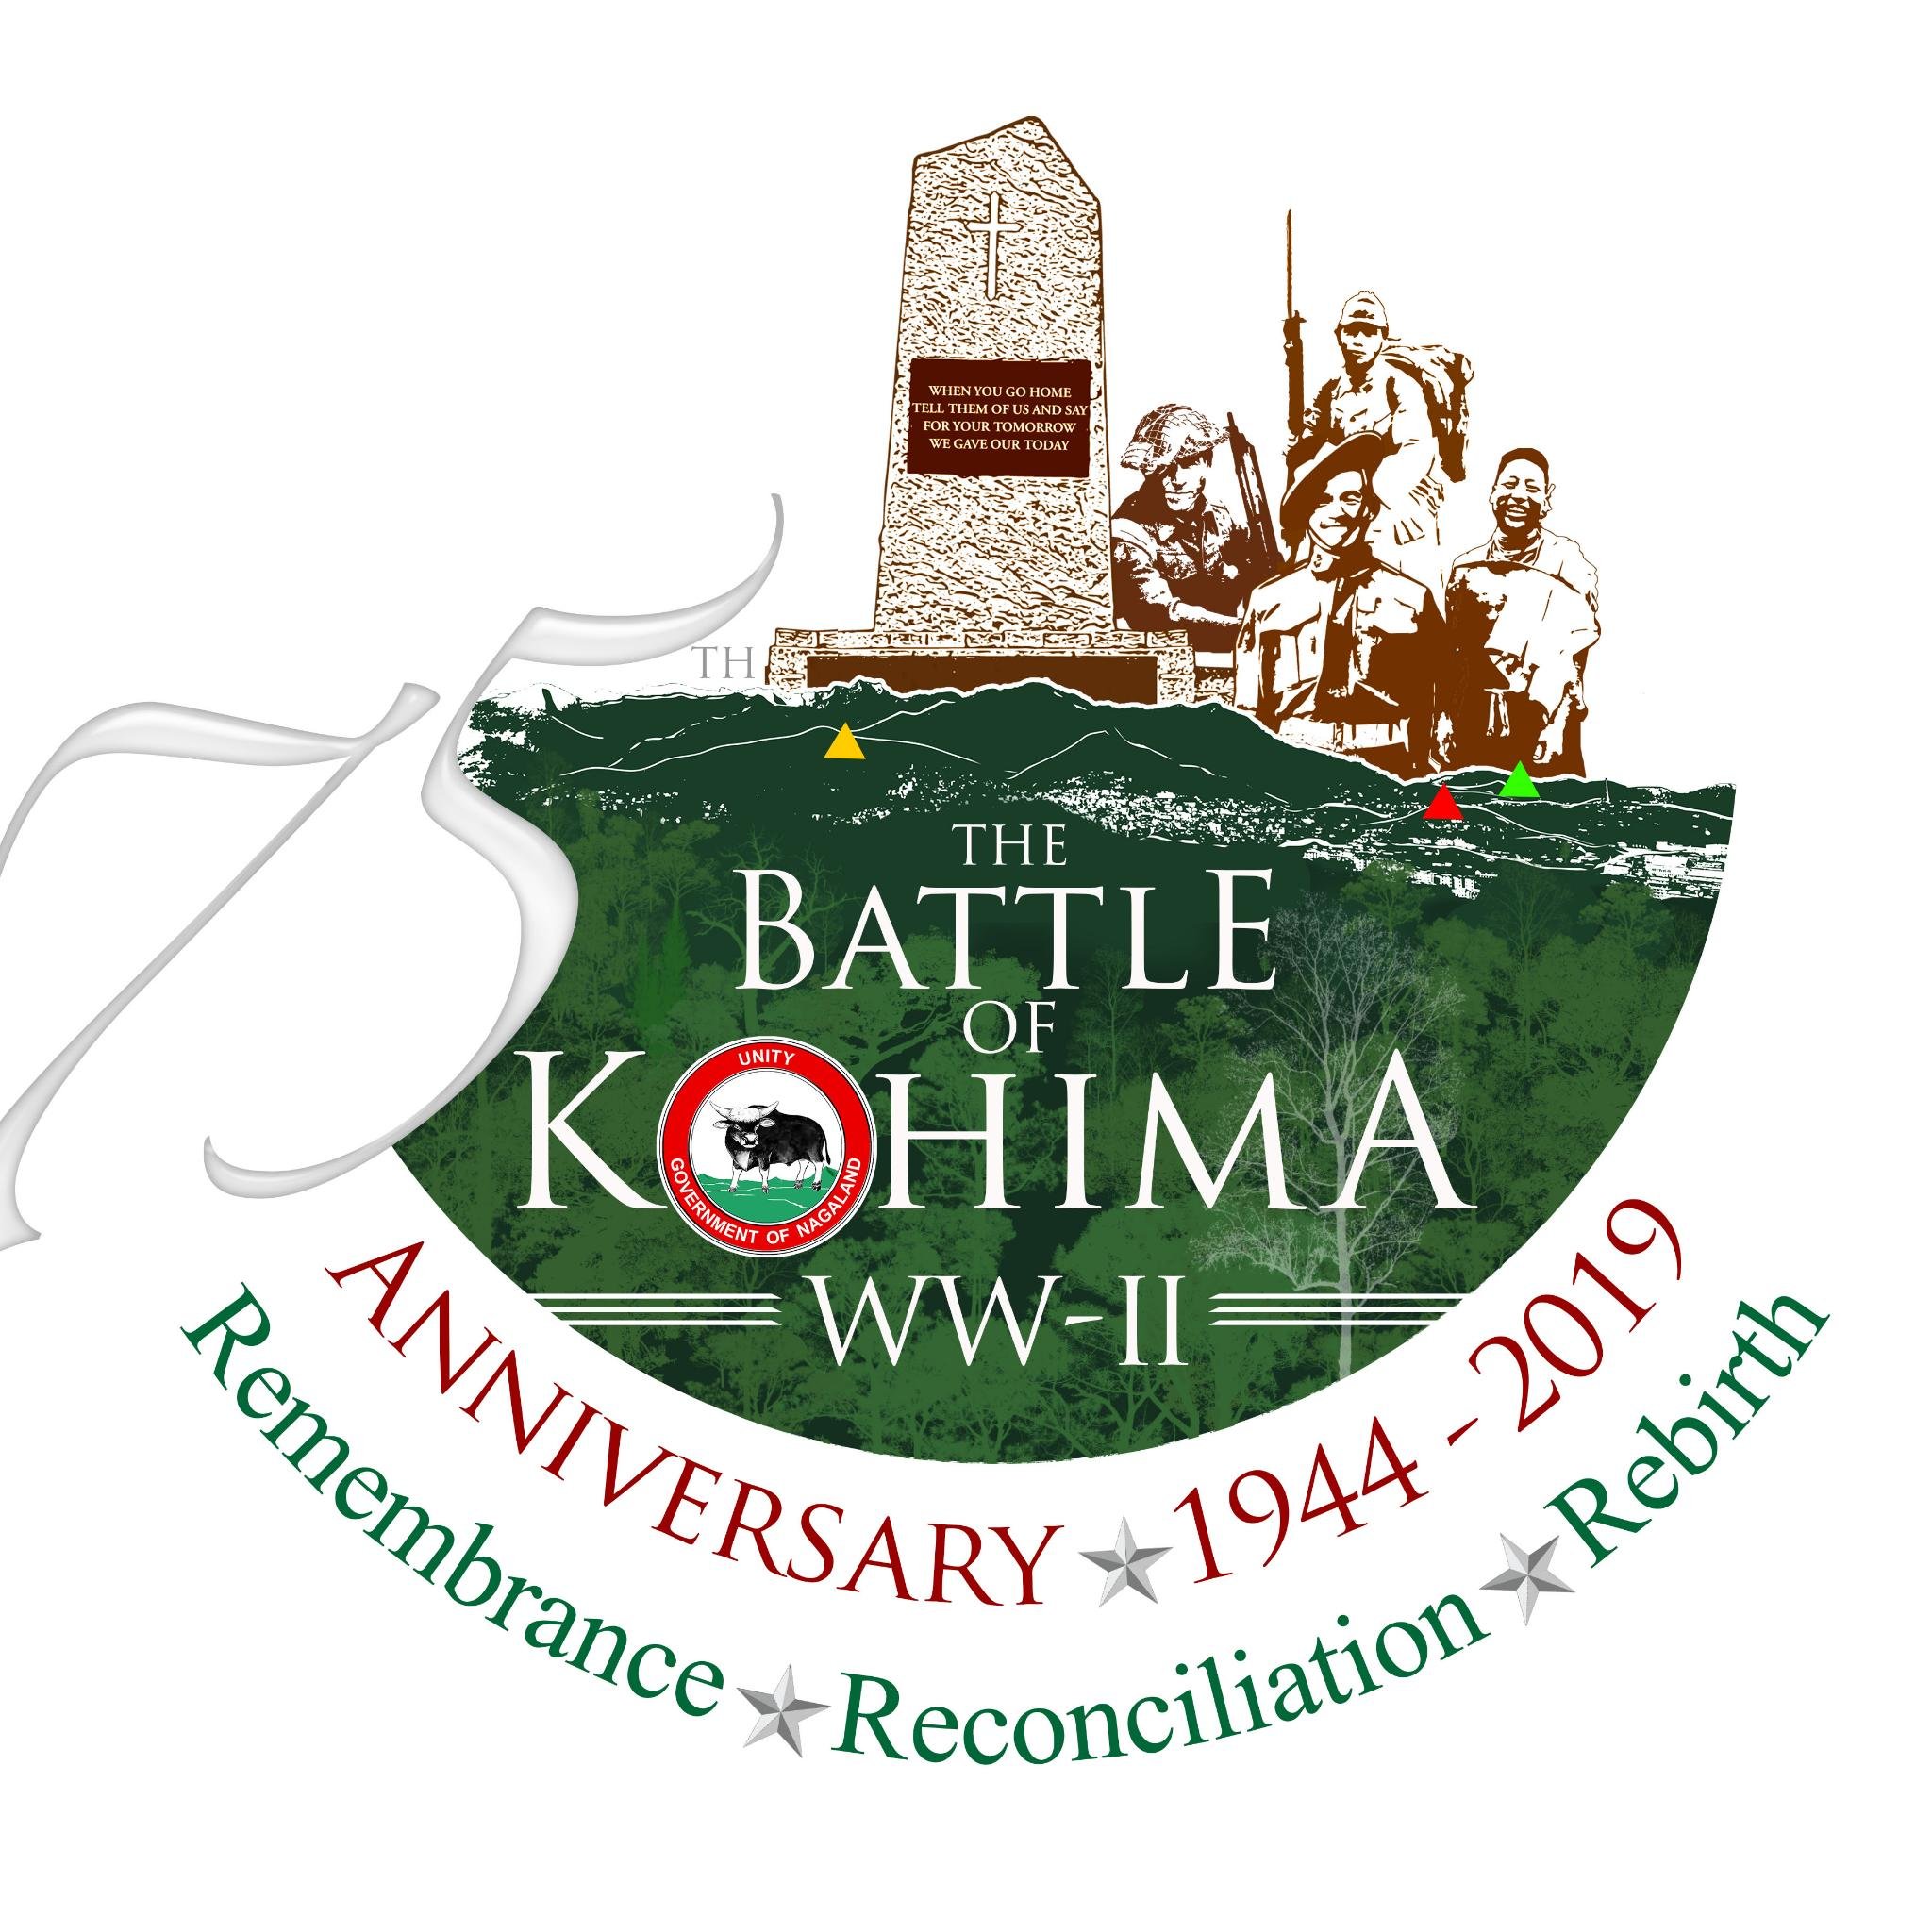 The Battle of Kohima was the turning point of the Japanese U Go offensive into India in 1944 during the Second World War. The battle was fought in three stages